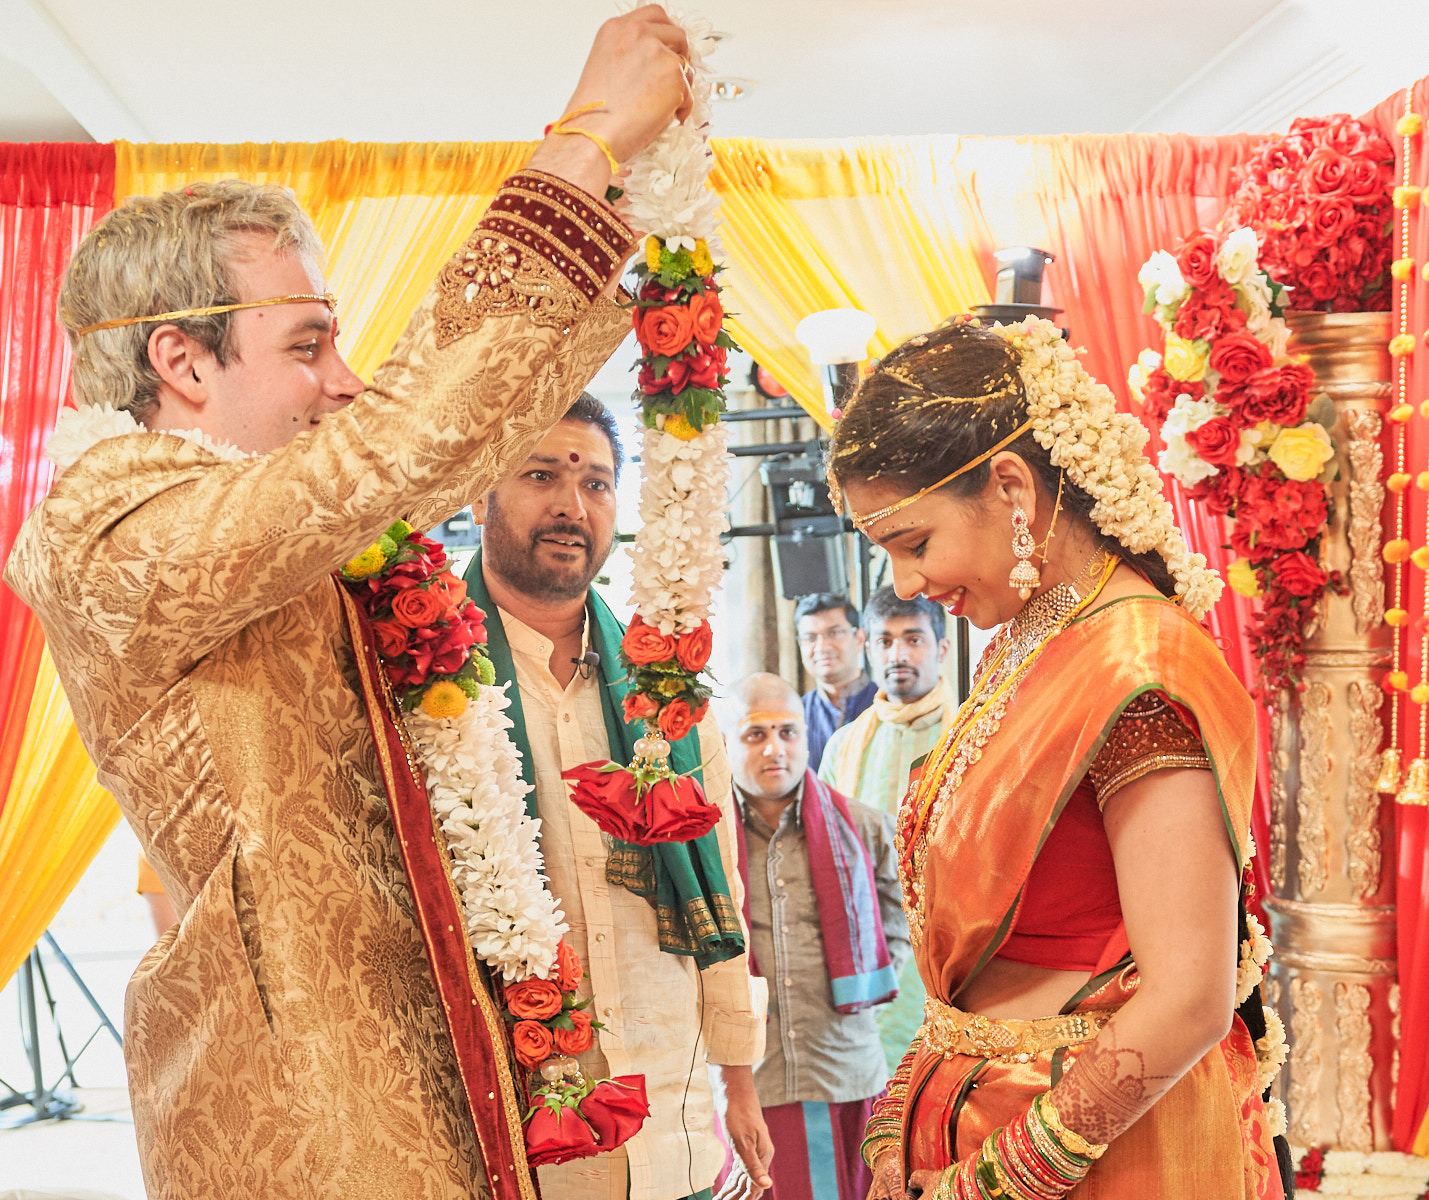 south-indian-wedding-ceremony-photography-by-afewgoodclicks-net-in-saratoga